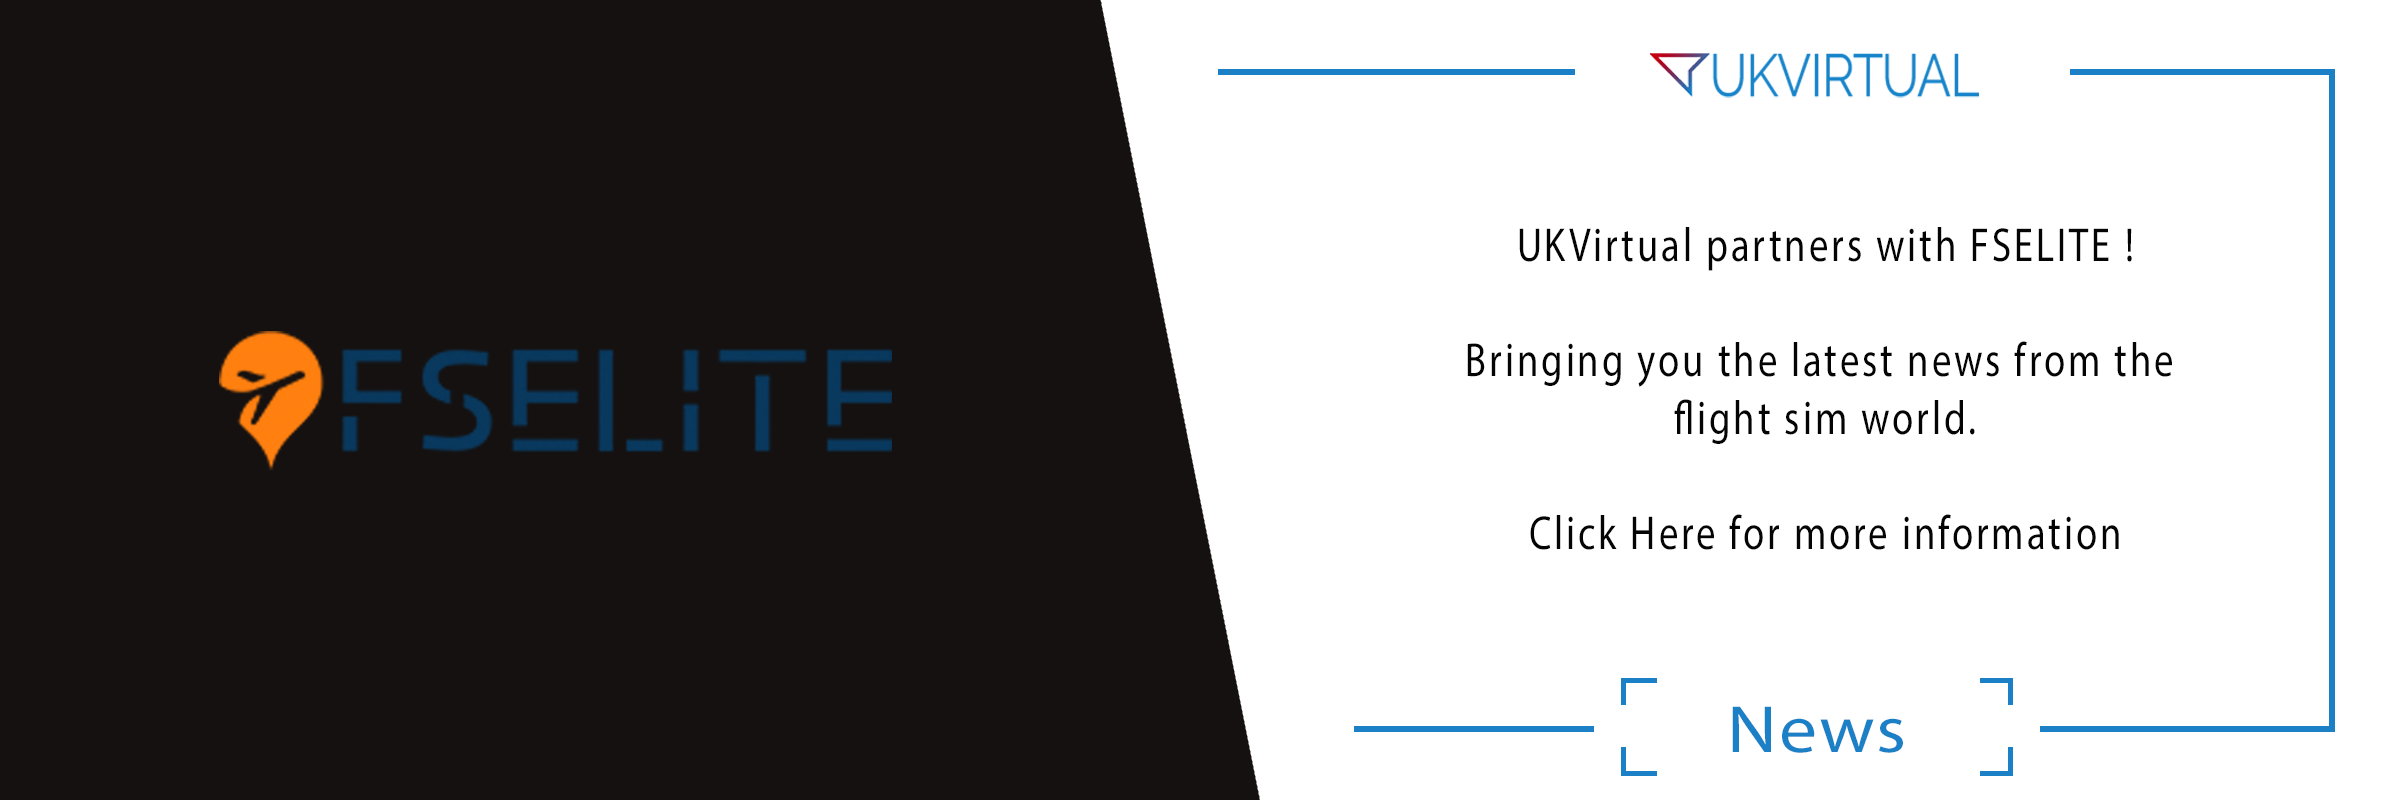 UKVirtual partners with FSELITE!